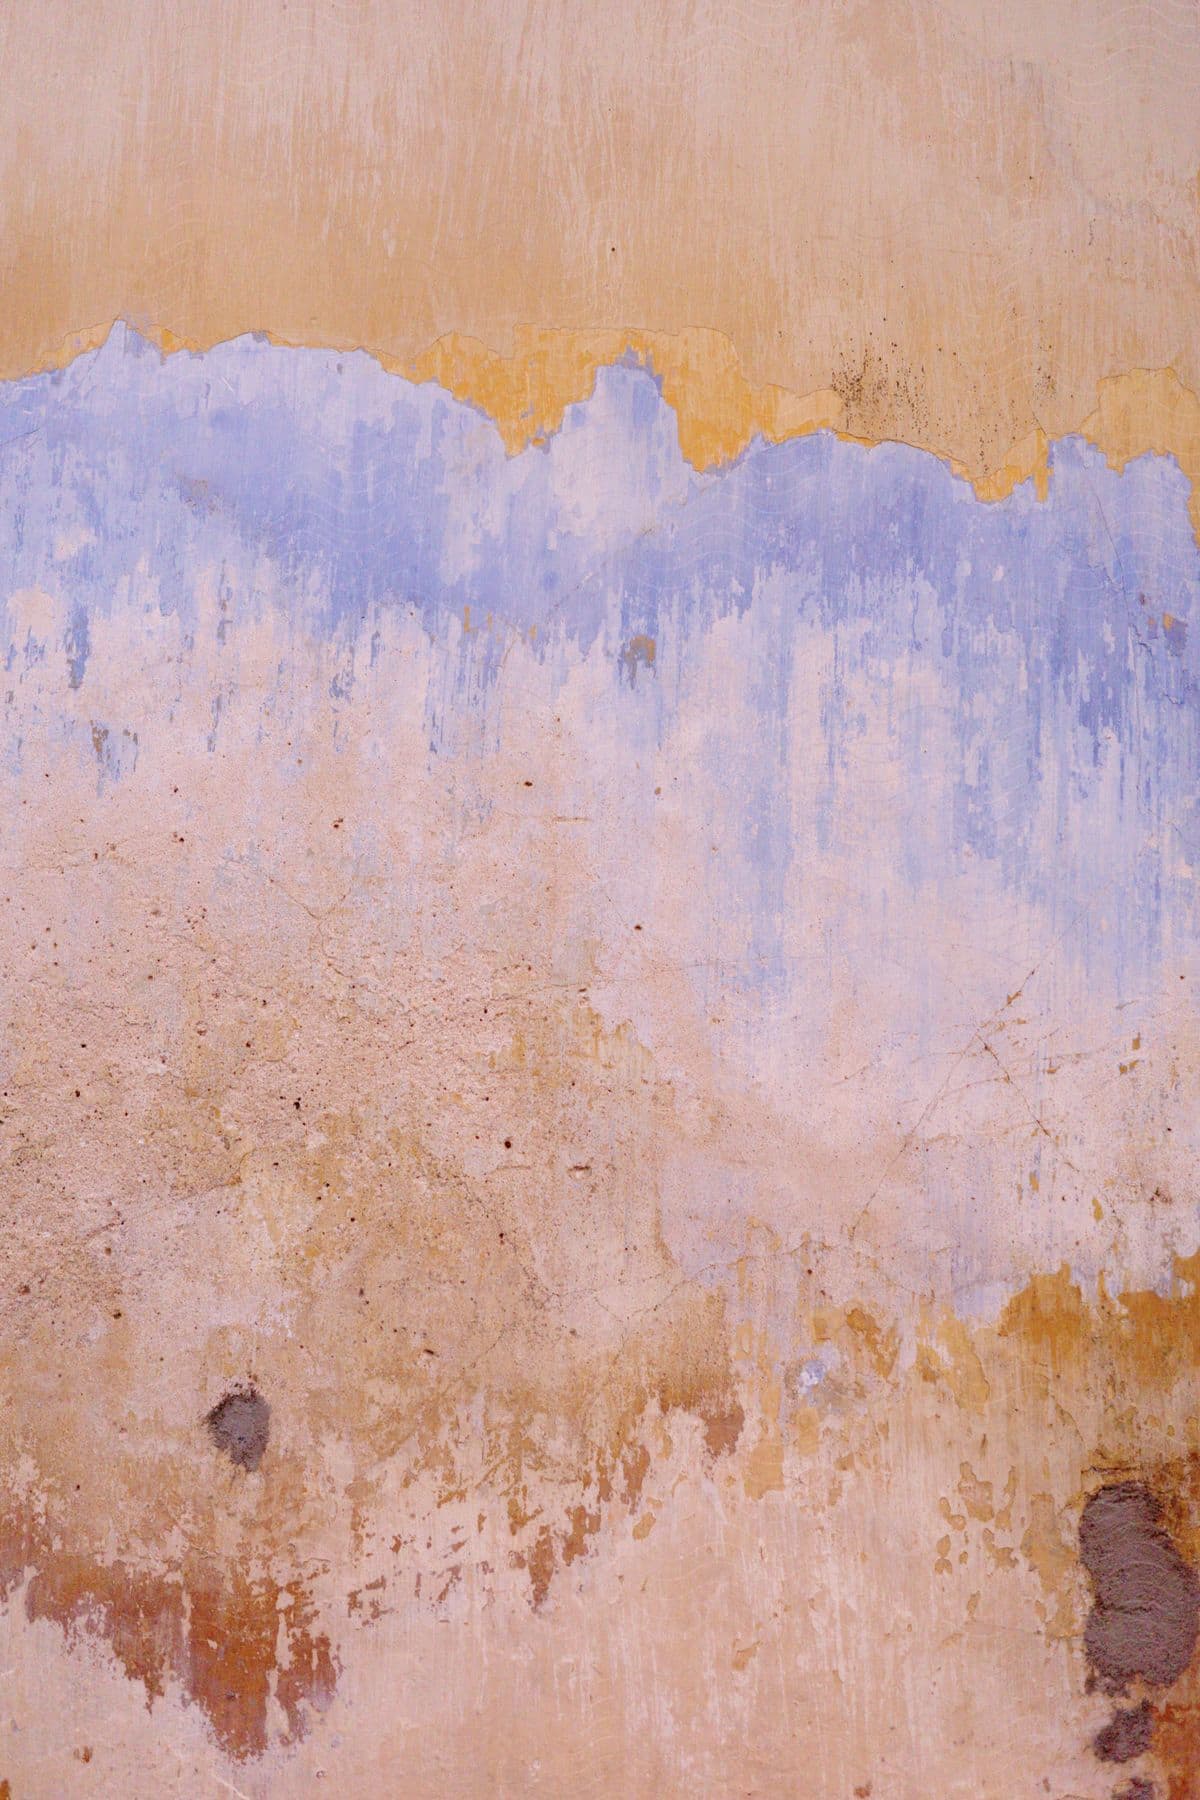 Weathered wall with peeling blue and yellow paint showing exposed textures